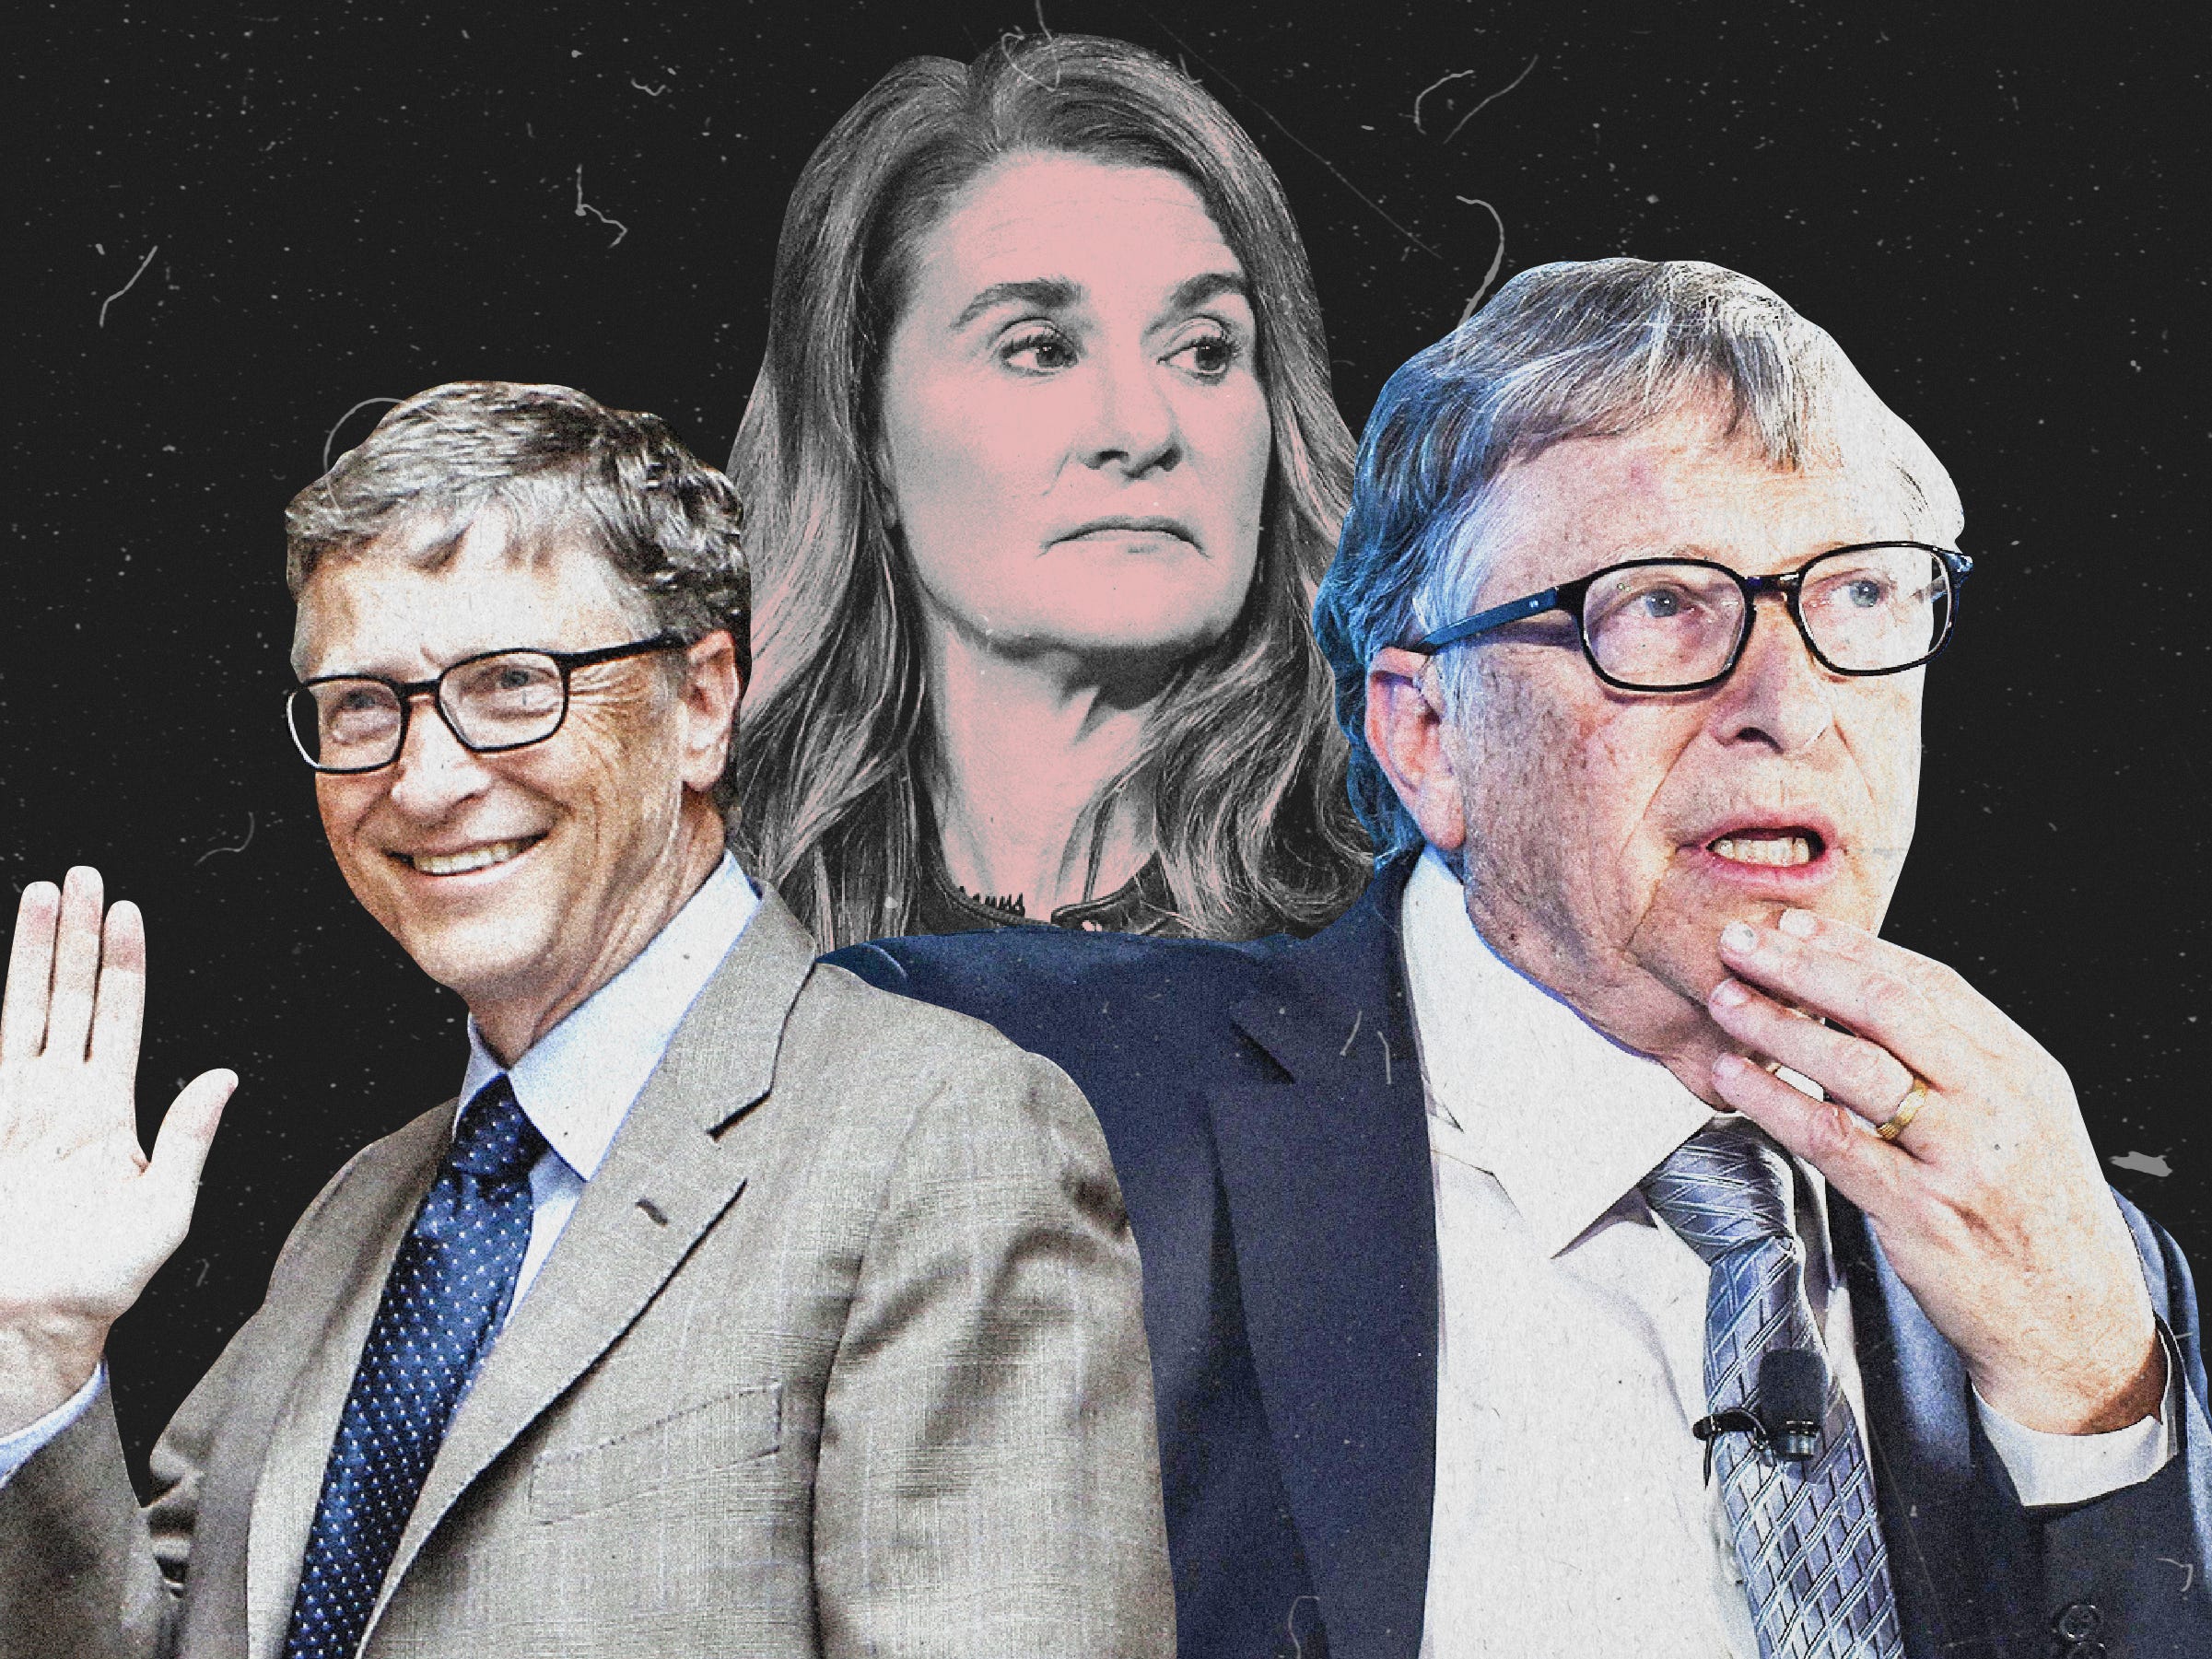 One image of a smiling Bill Gates on the left, a stern Melinda Gates in the center, and a thinking Bill Gates to the right on a black background